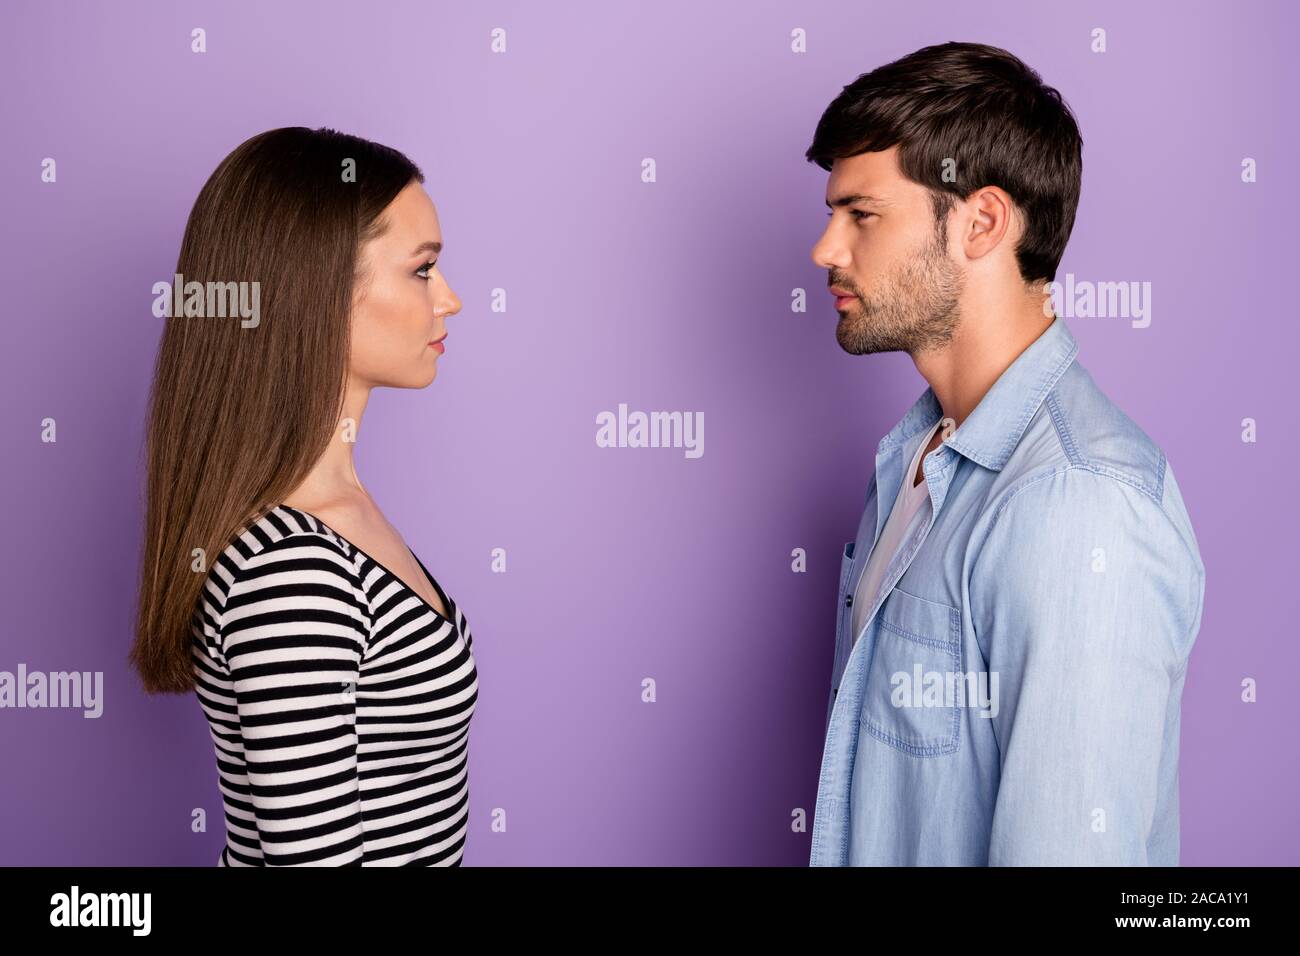 Profile photo of two people couple guy lady standing opposite looking eyes have conflict situation wear stylish casual outfit isolated pastel purple Stock Photo